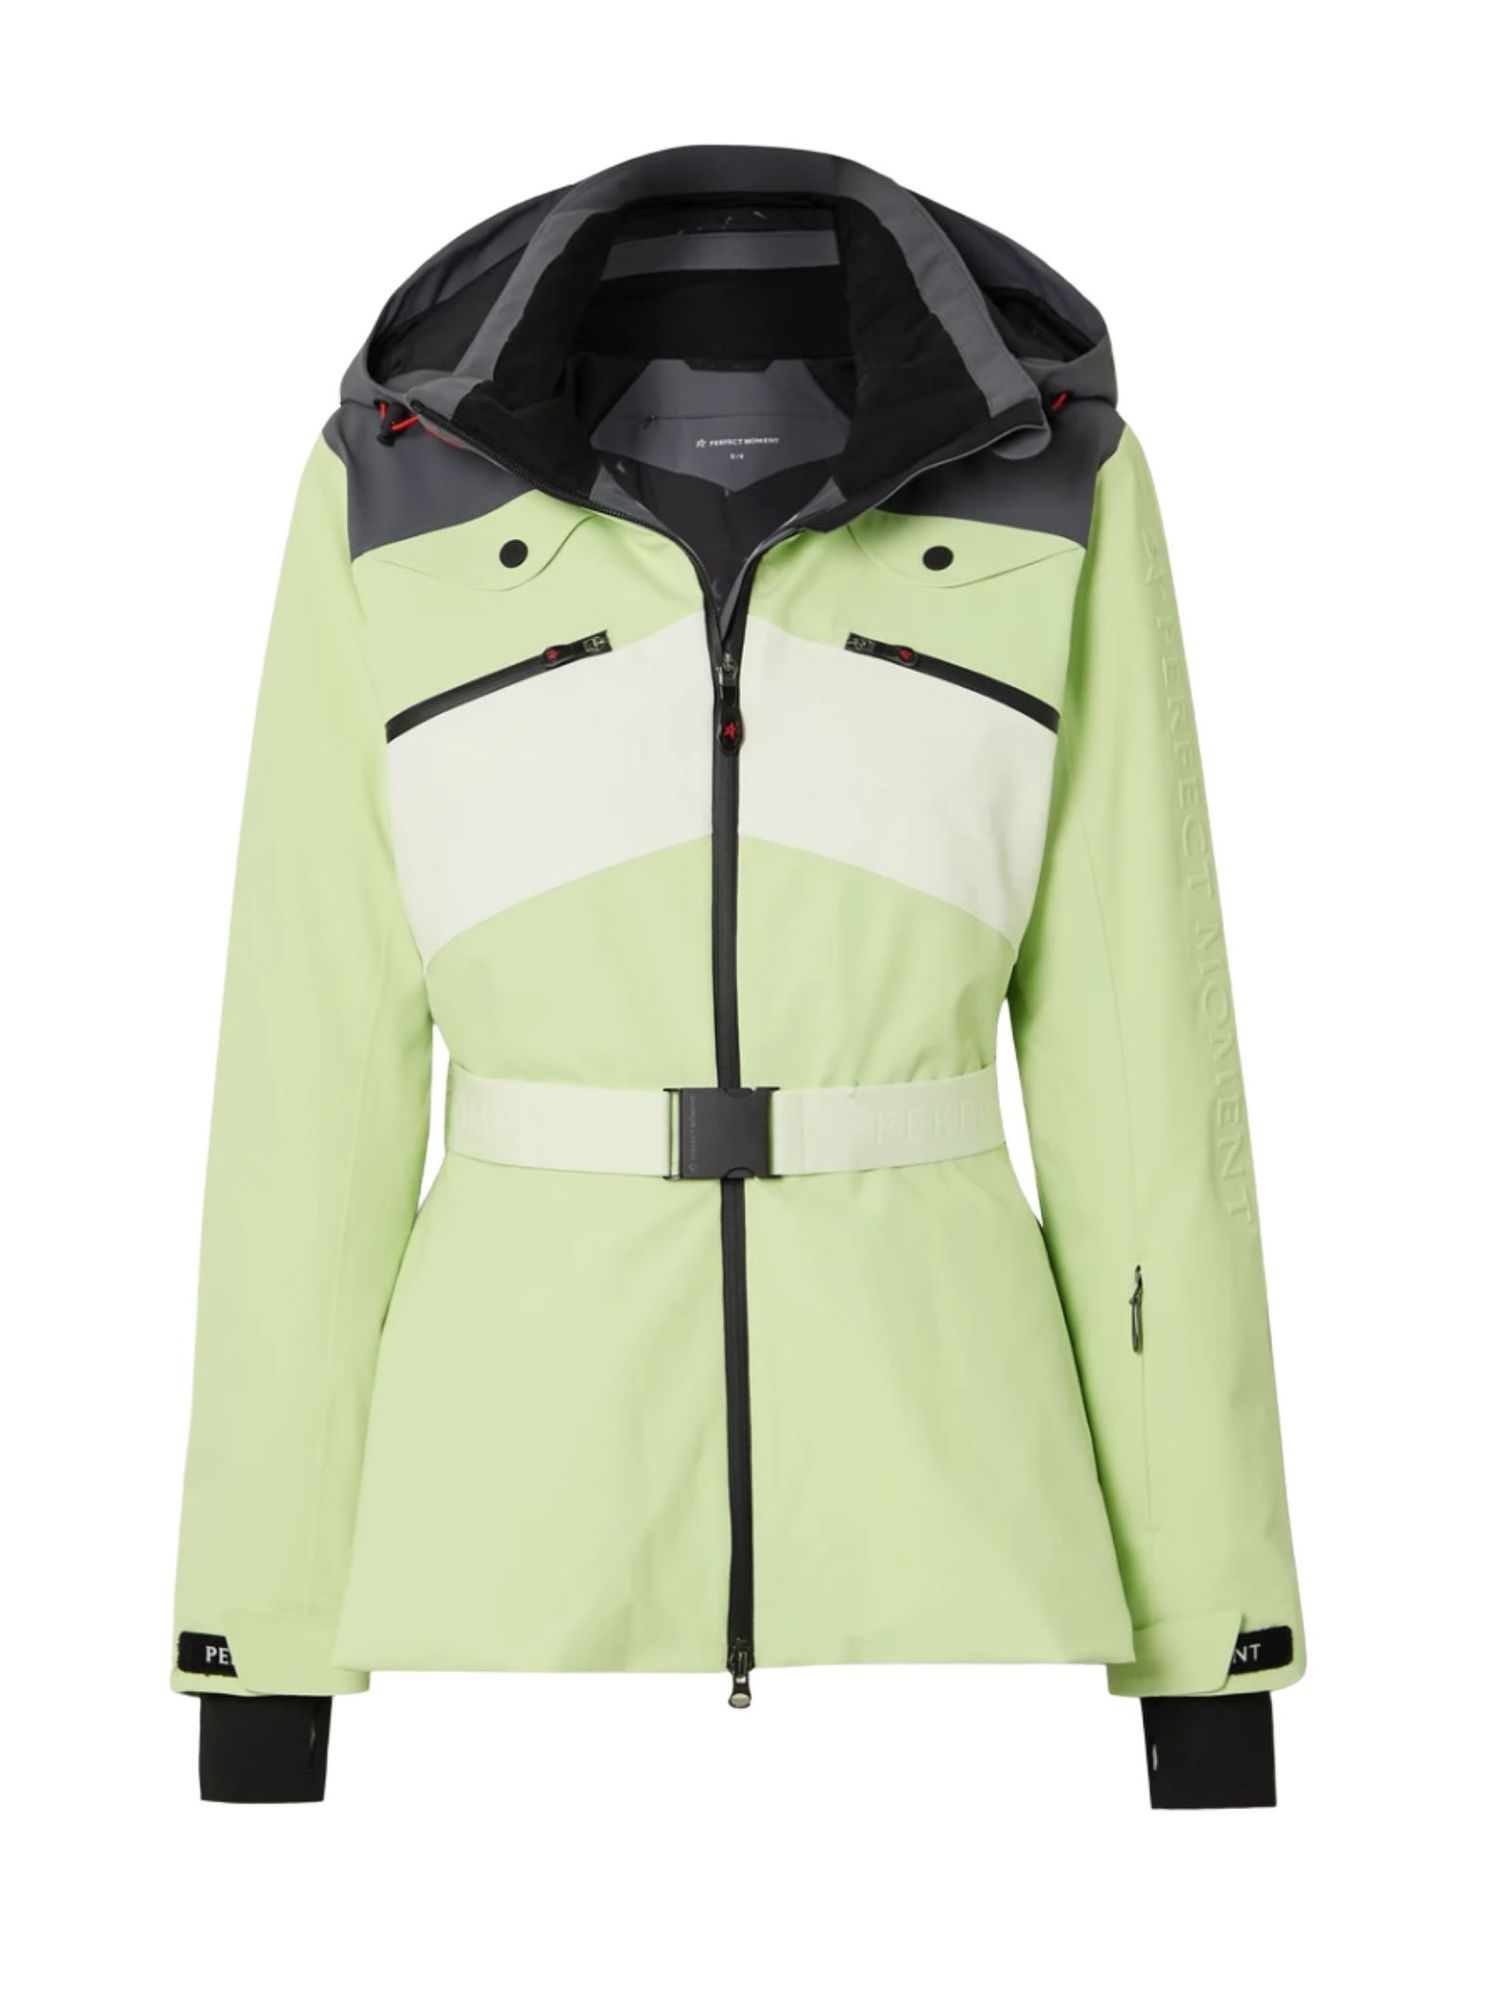 5 designer ski outfits we can't wait to hit the slopes in - Vogue  Scandinavia